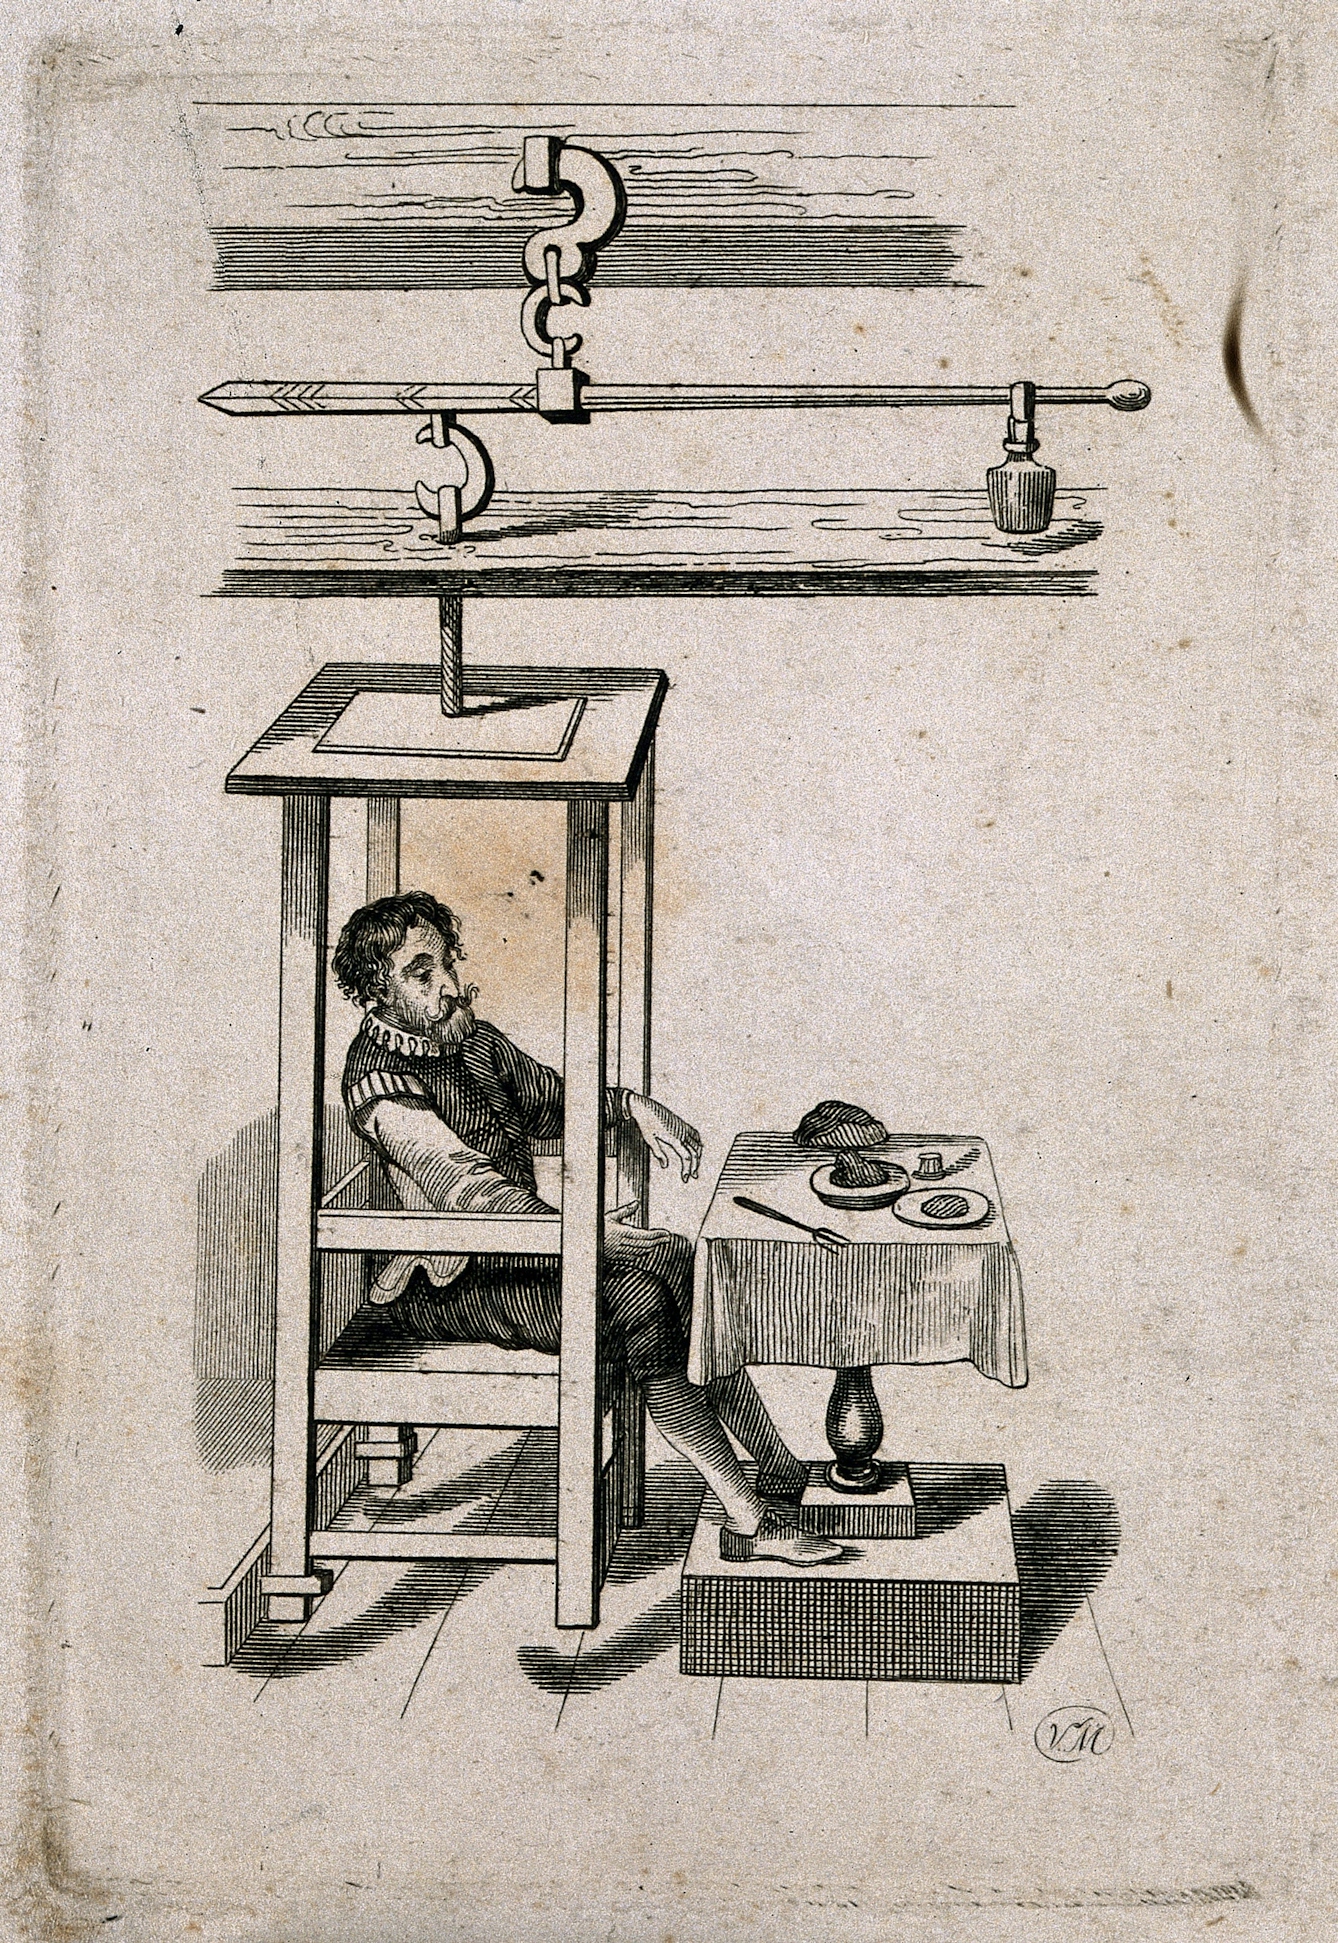 Sanctorius Sanctorius, an experimentalist sitting in a chair hanging from a lever, with a table set with food before him.